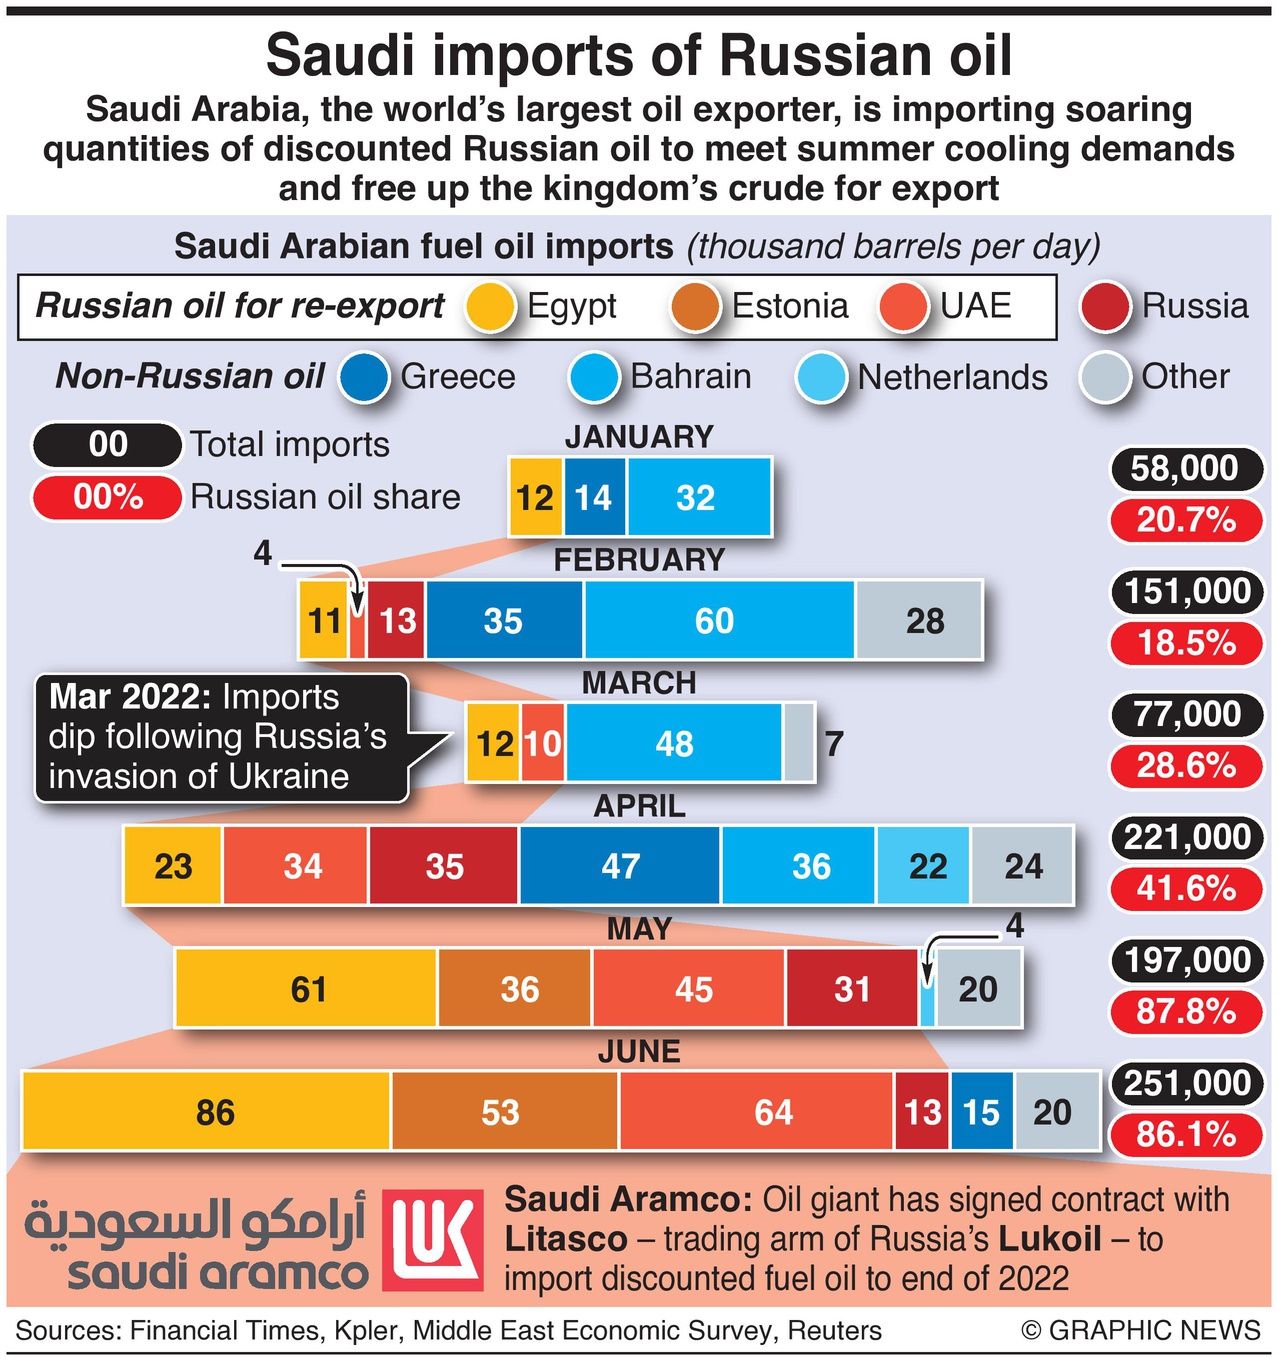 Saudi Imports of Russian Oil infographic by Duncan mil